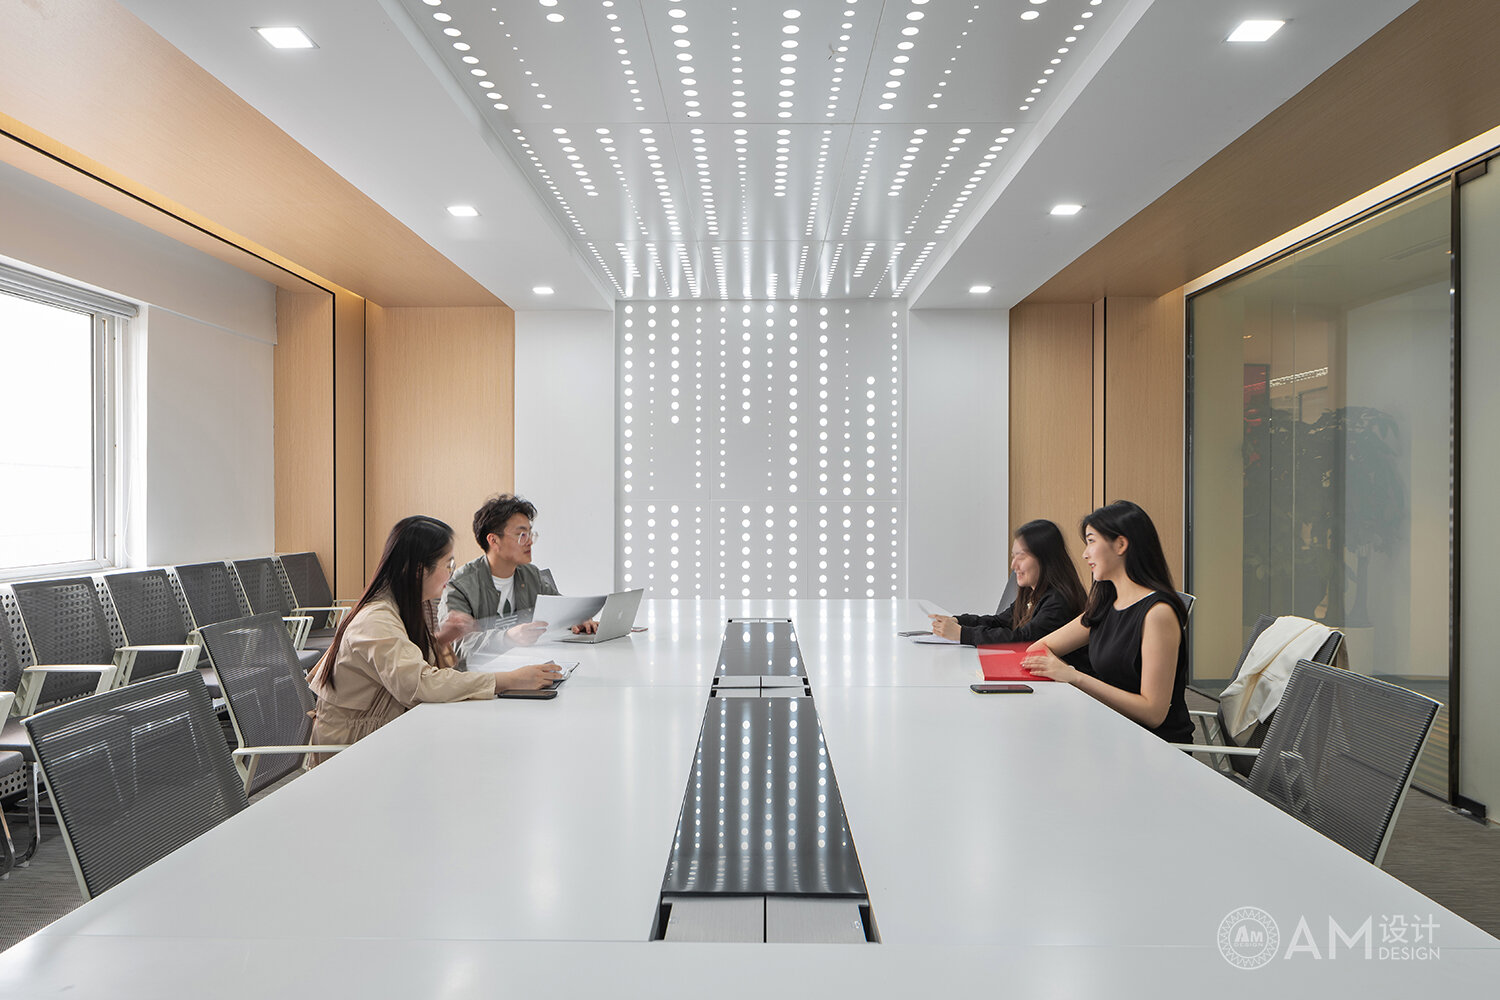 AM DESIGN | Beijing Taihe Music Group Headquarters Conference Room Design